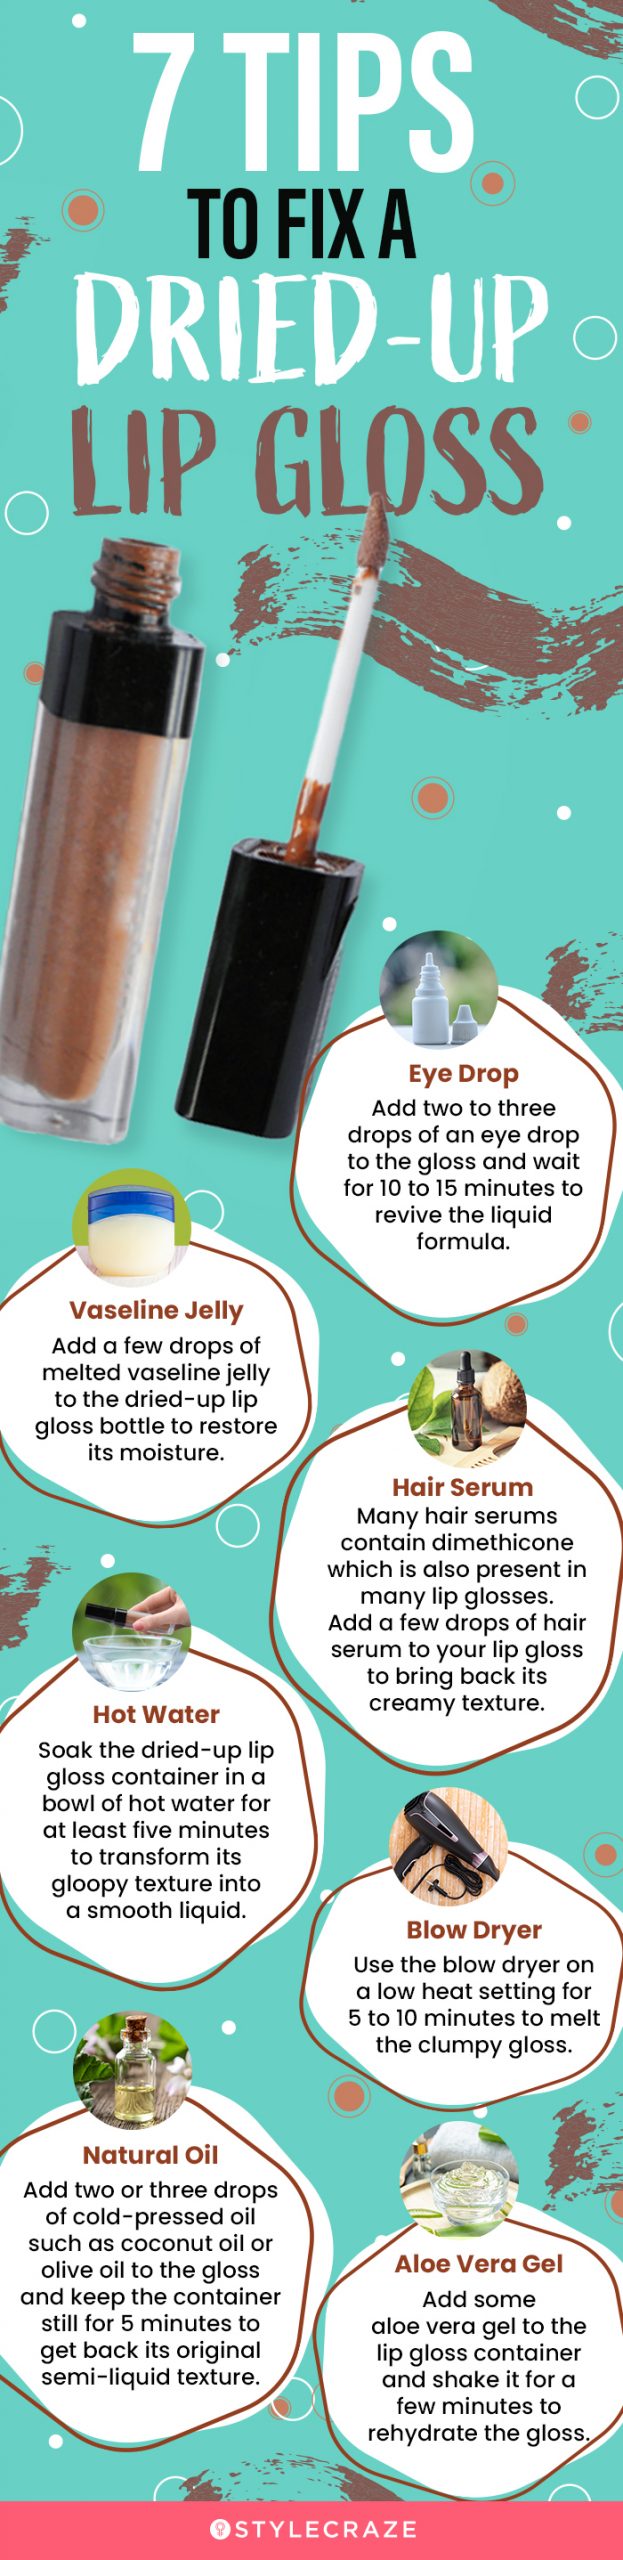 7 Tips To Fix A Dried-Up Lip Gloss (infographic)